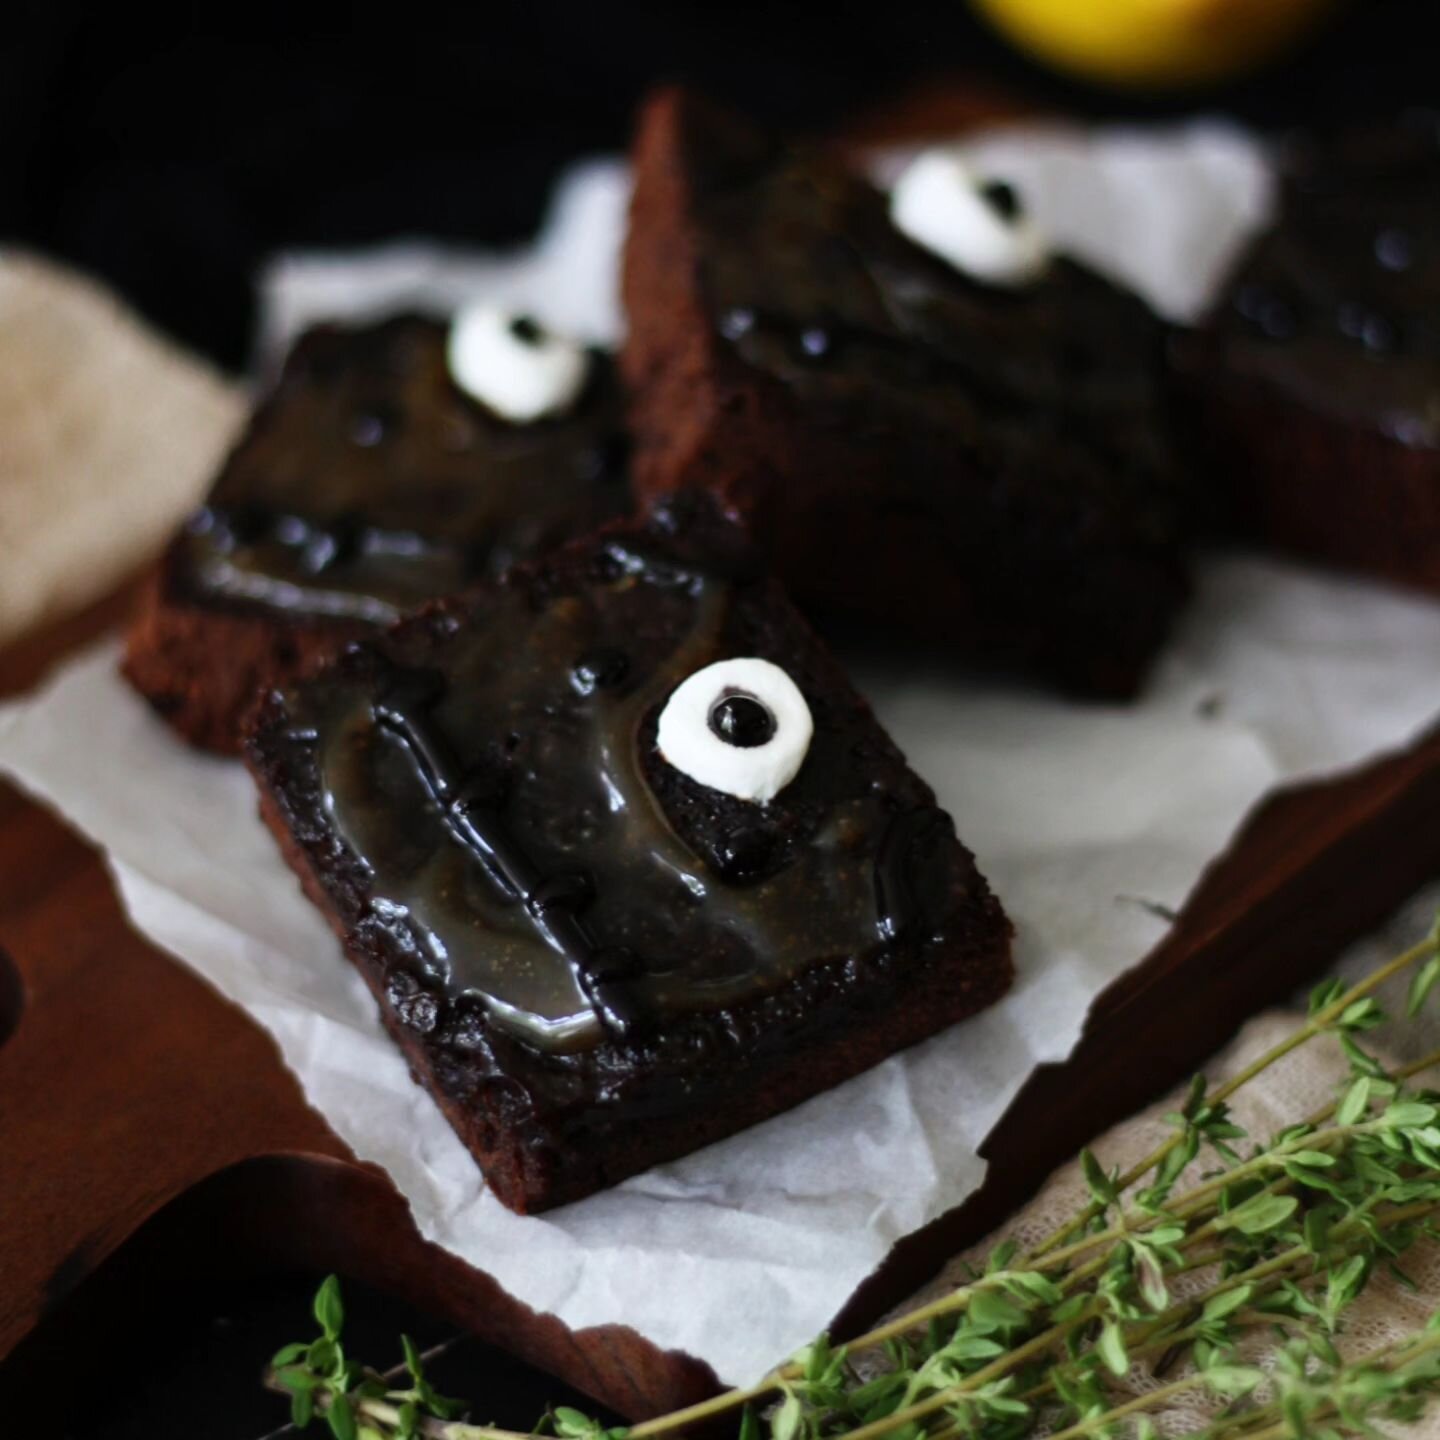 🎃🧙🧹

I absolutely hate how many recipes I lost when my blog crashed a couple of years ago. This Hocus Pocus date night was such a cute one, and I can't find any backups of these recipes! Maybe one day I'll find at least a paper copy

Until then, e